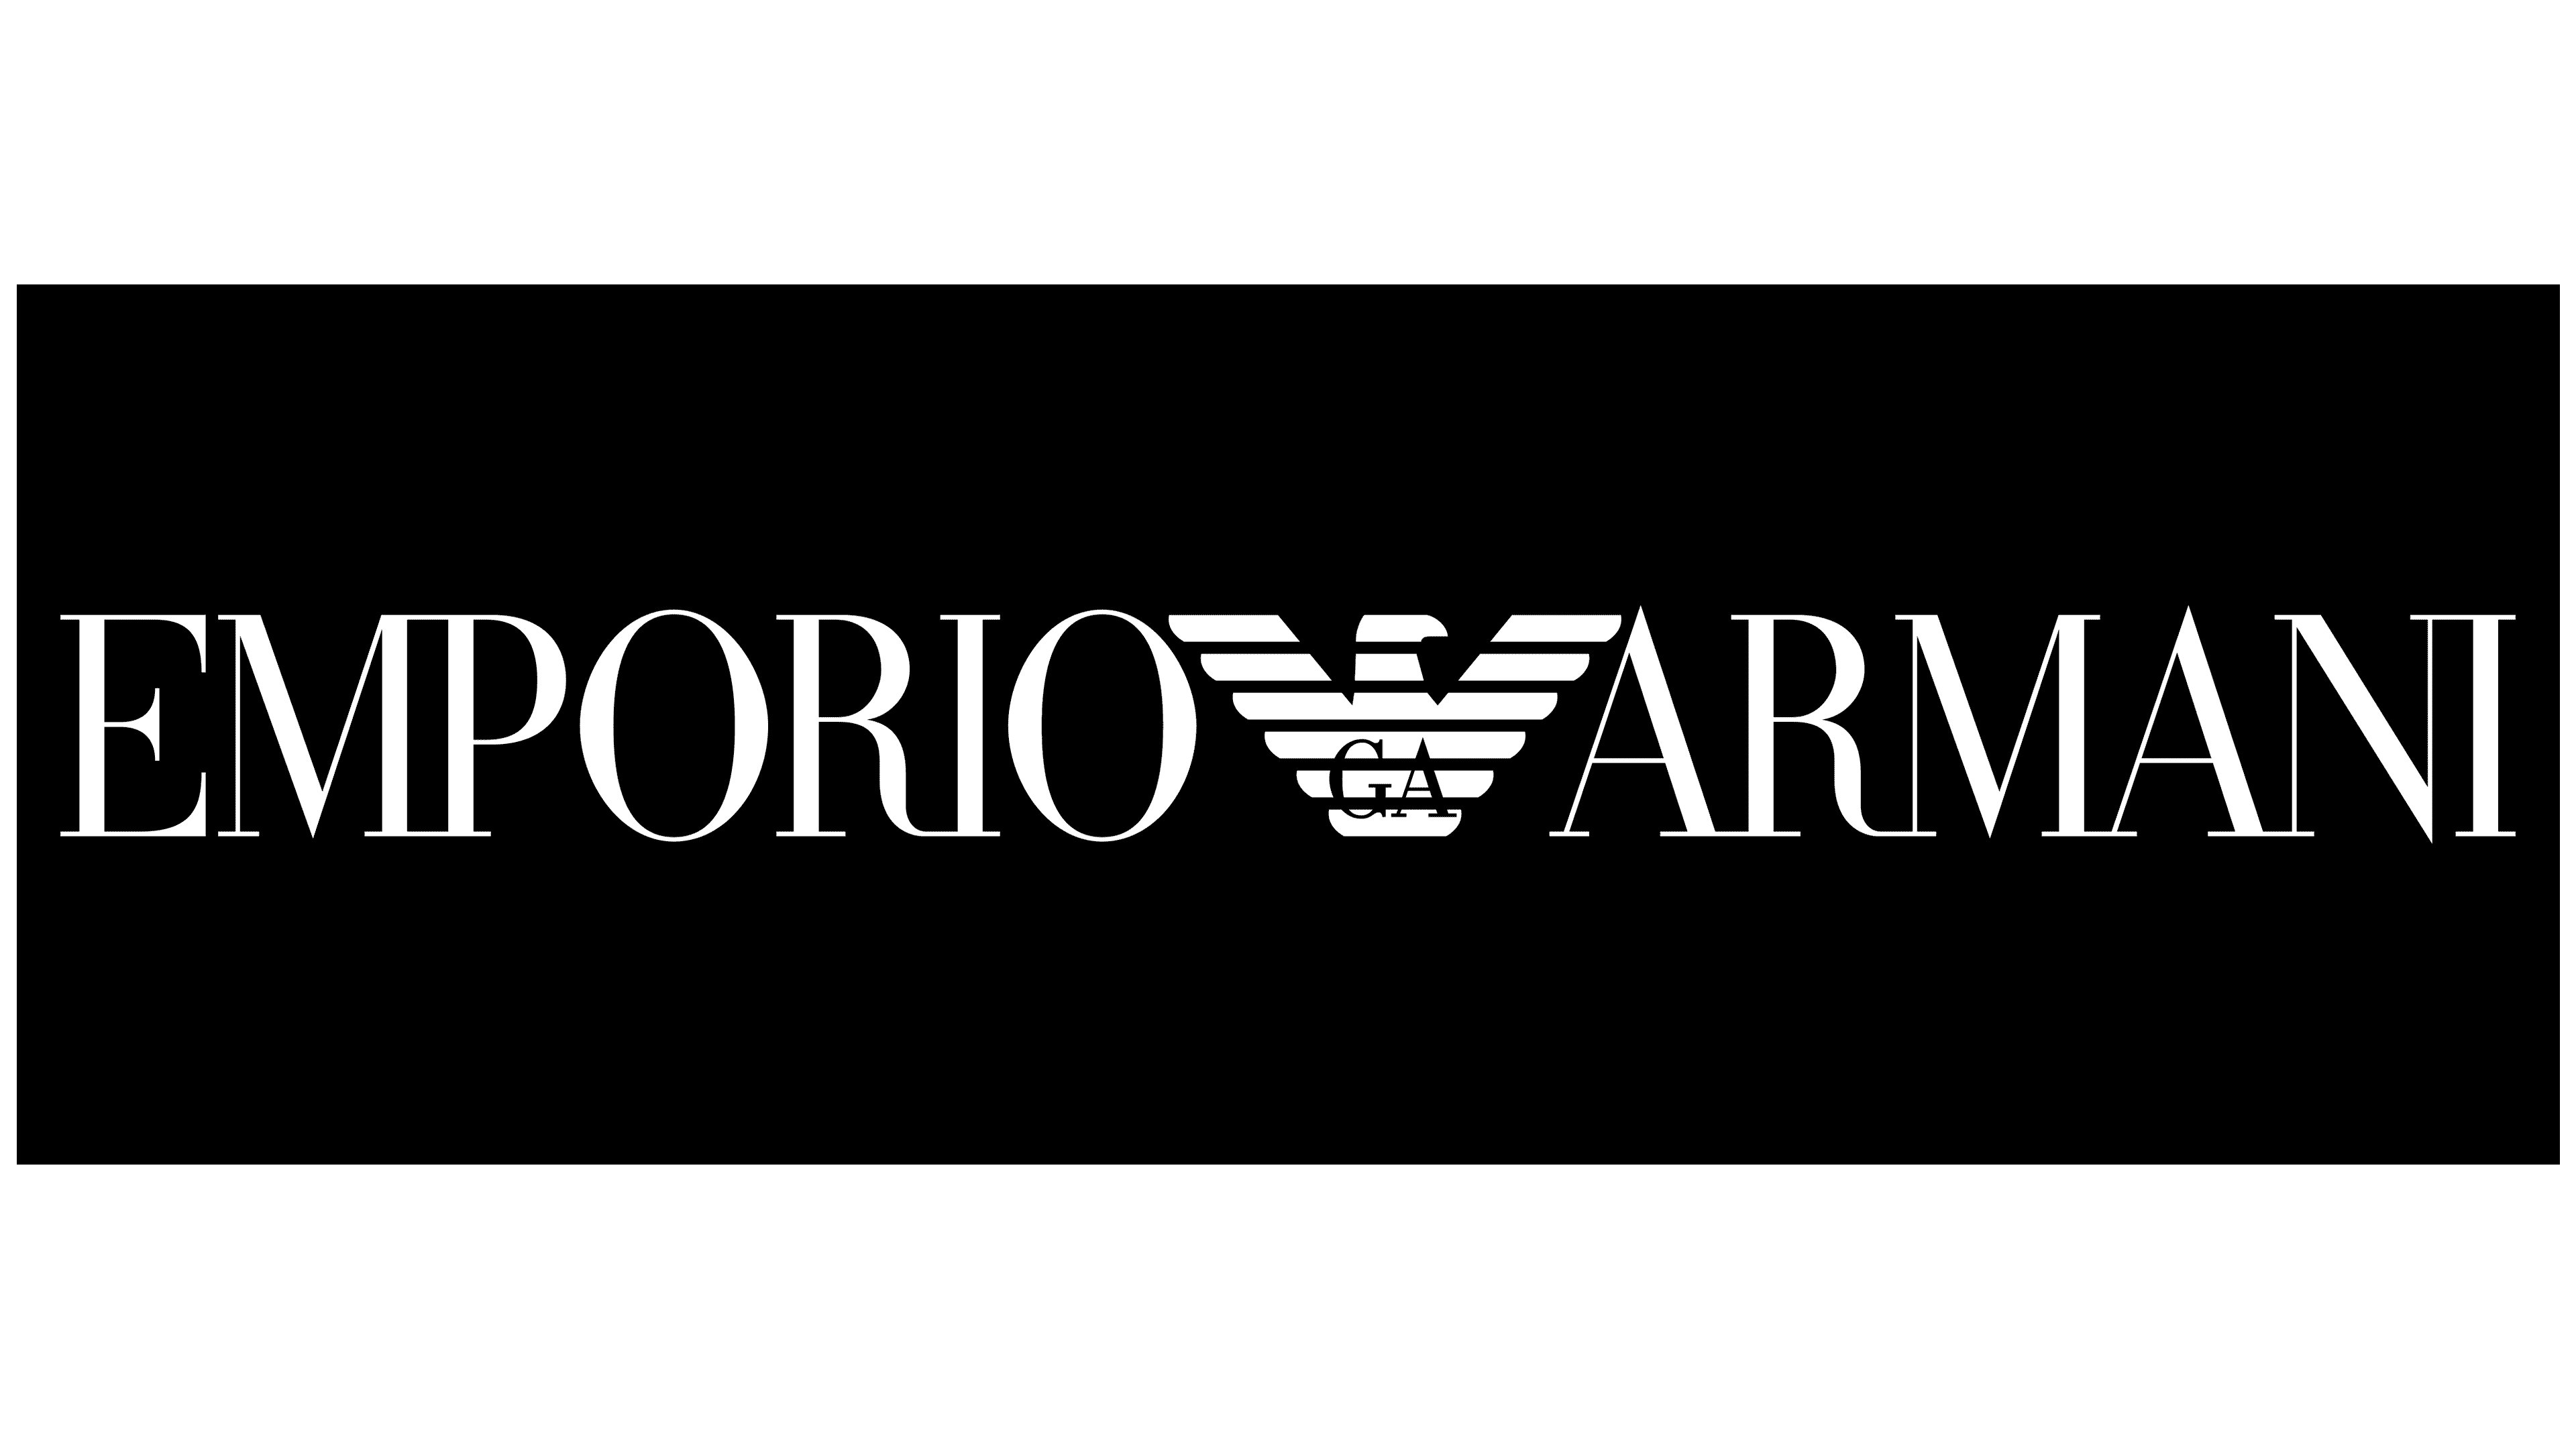 Download Armani Logo In Svg Vector Or Png File Format - vrogue.co